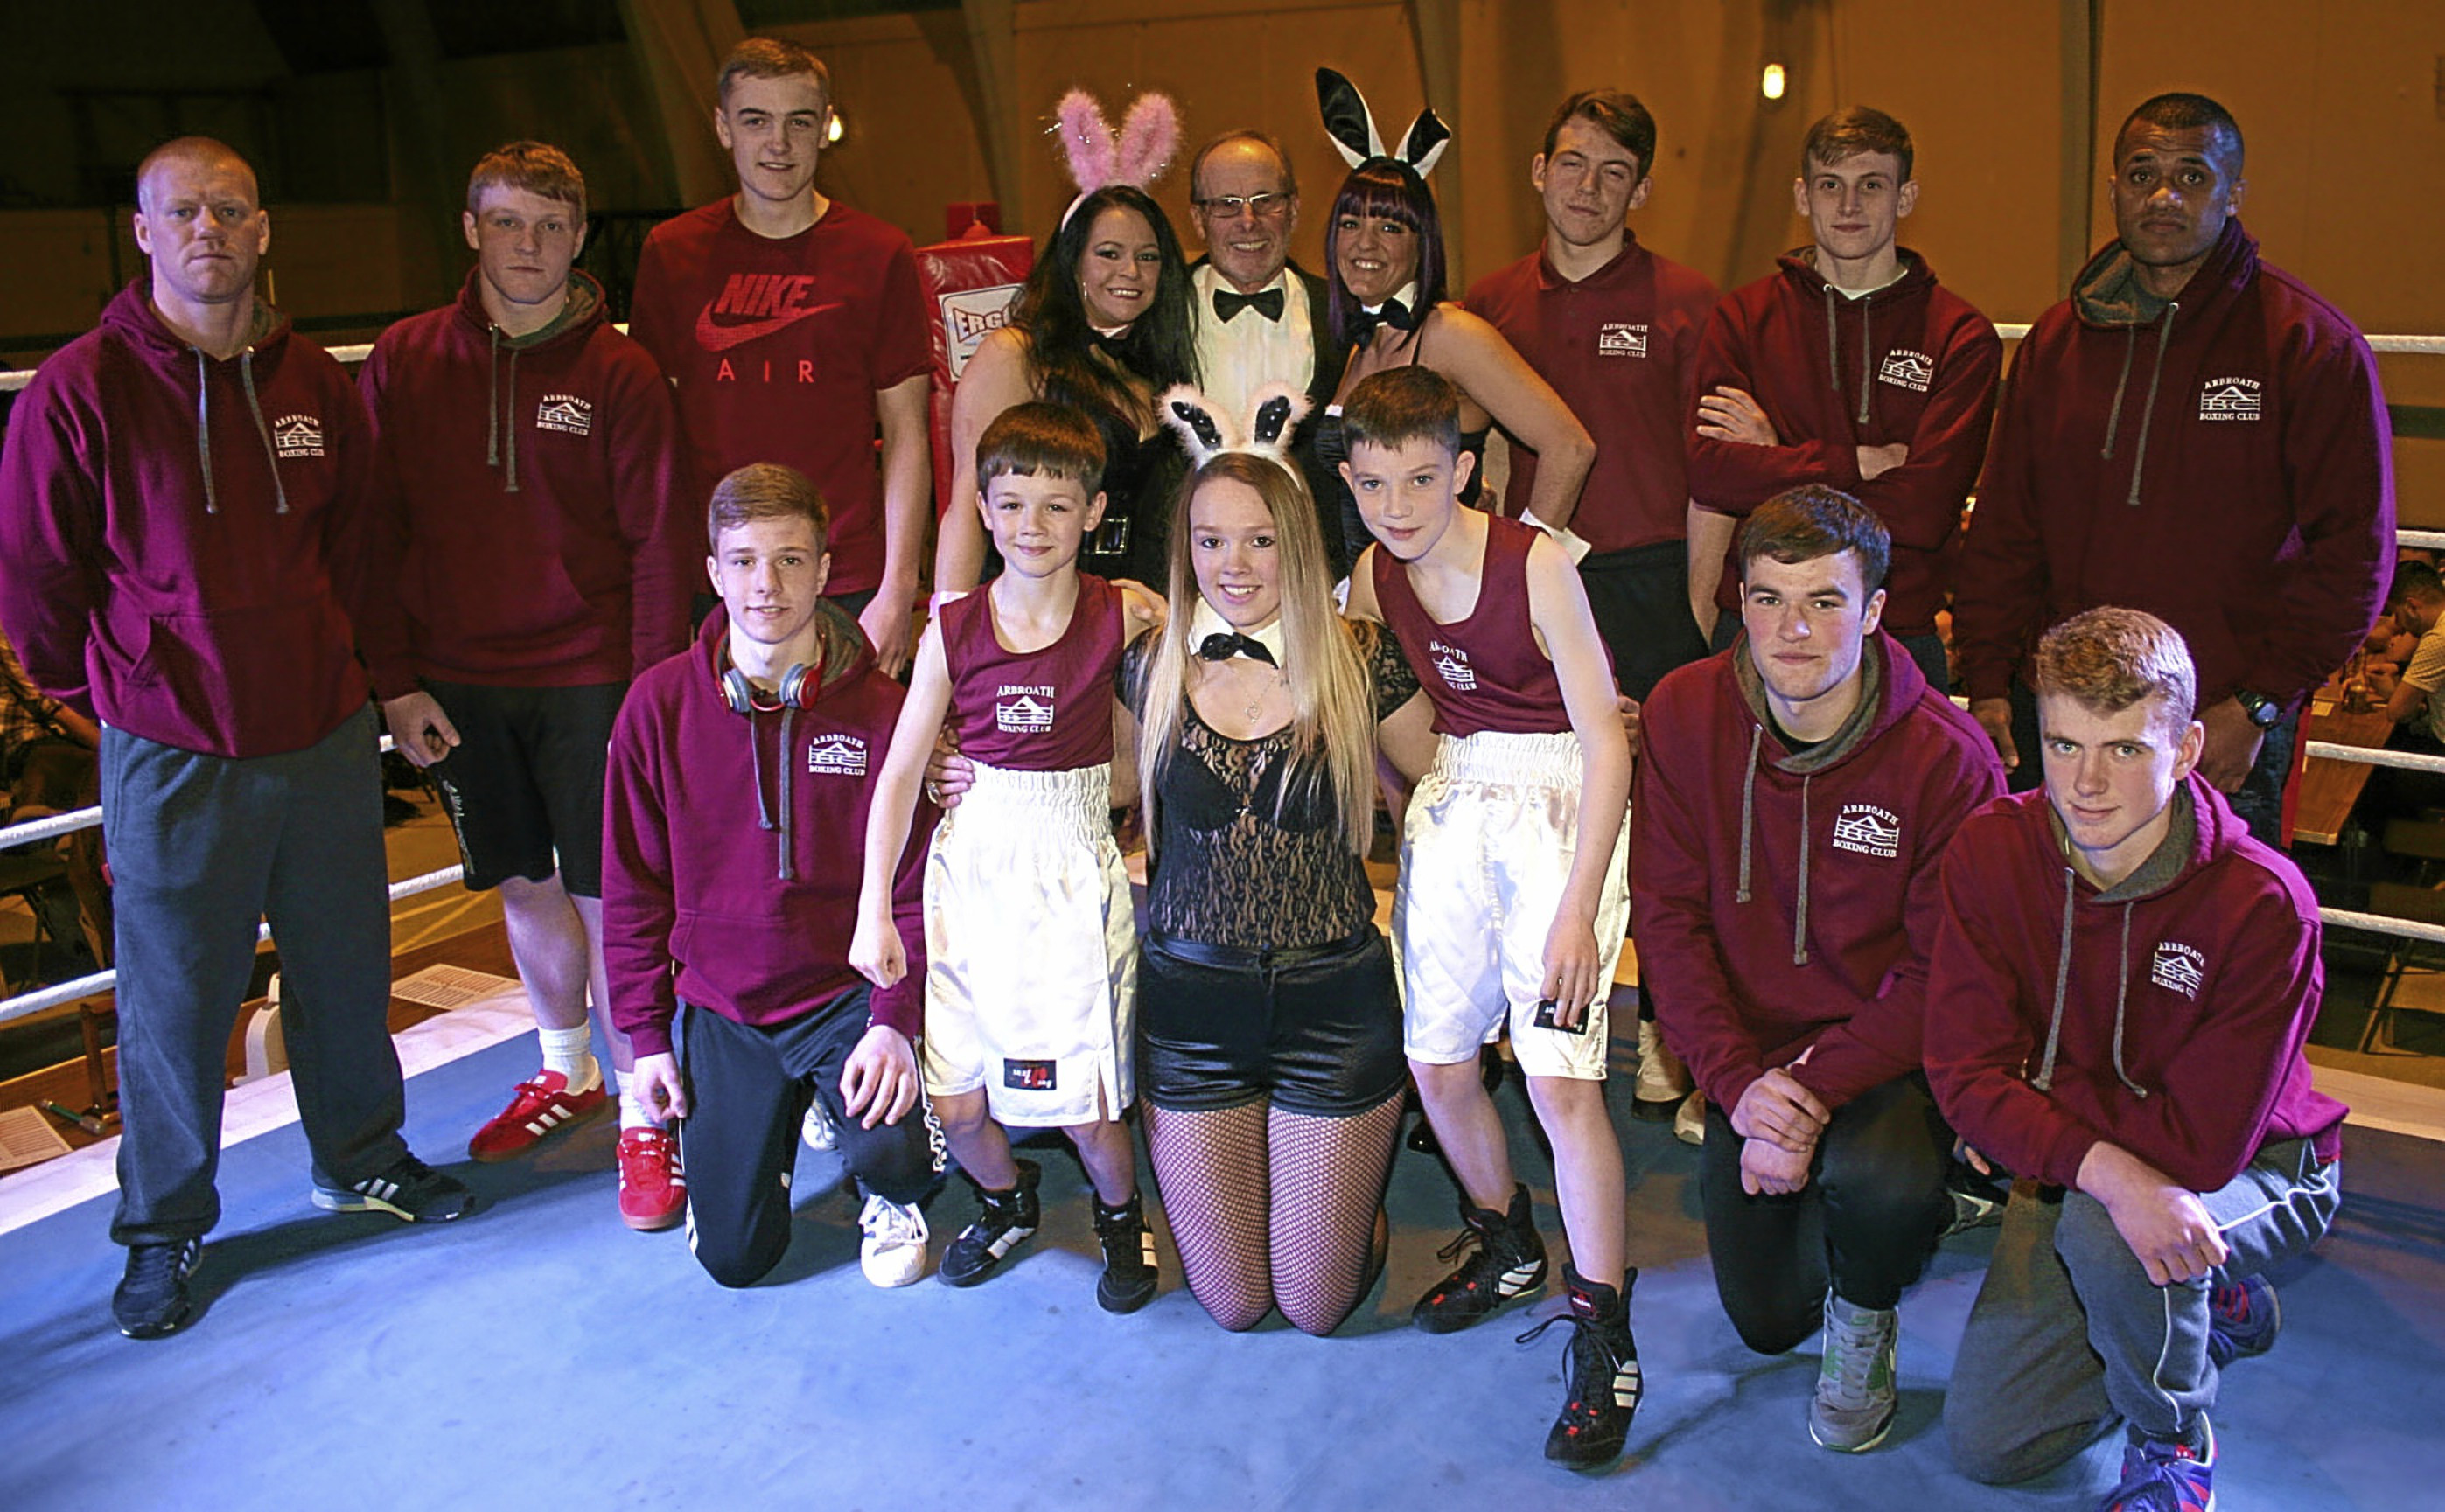 The Arbroath boxers who took part with ring girl Louise Berrie at the front.